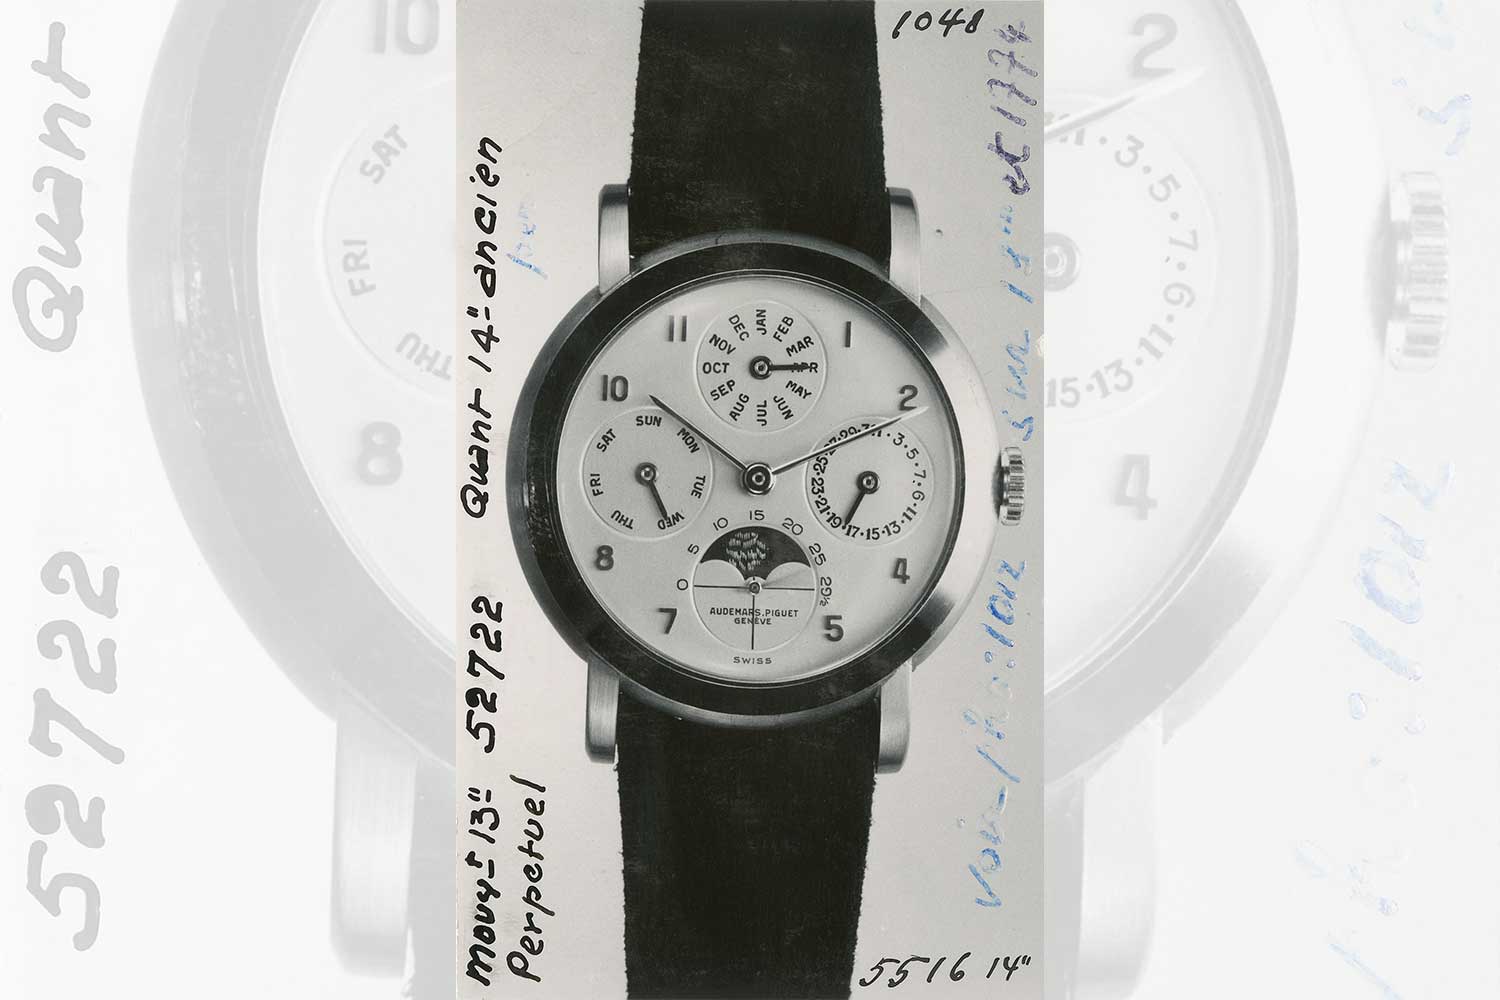 In the Audemars Piguet Registers of Completed Watches (paired with photograph no. 1048 from the manufacture's archives), a watchmaker states that he had transformed a historical 14-ligne perpetual calendar underdial work "qui traînait depuis 60 à 70 ans" (that had been hanging around for 60 to 70 years) in company stocks and that he adapted it to Calibre 13VZSS made in 1947. The watch 52722 was then sold in Bangkok in 1951, where it has potentially stayed in the same family during at least half a century, and where Audemars Piguet believes it still remains to this day